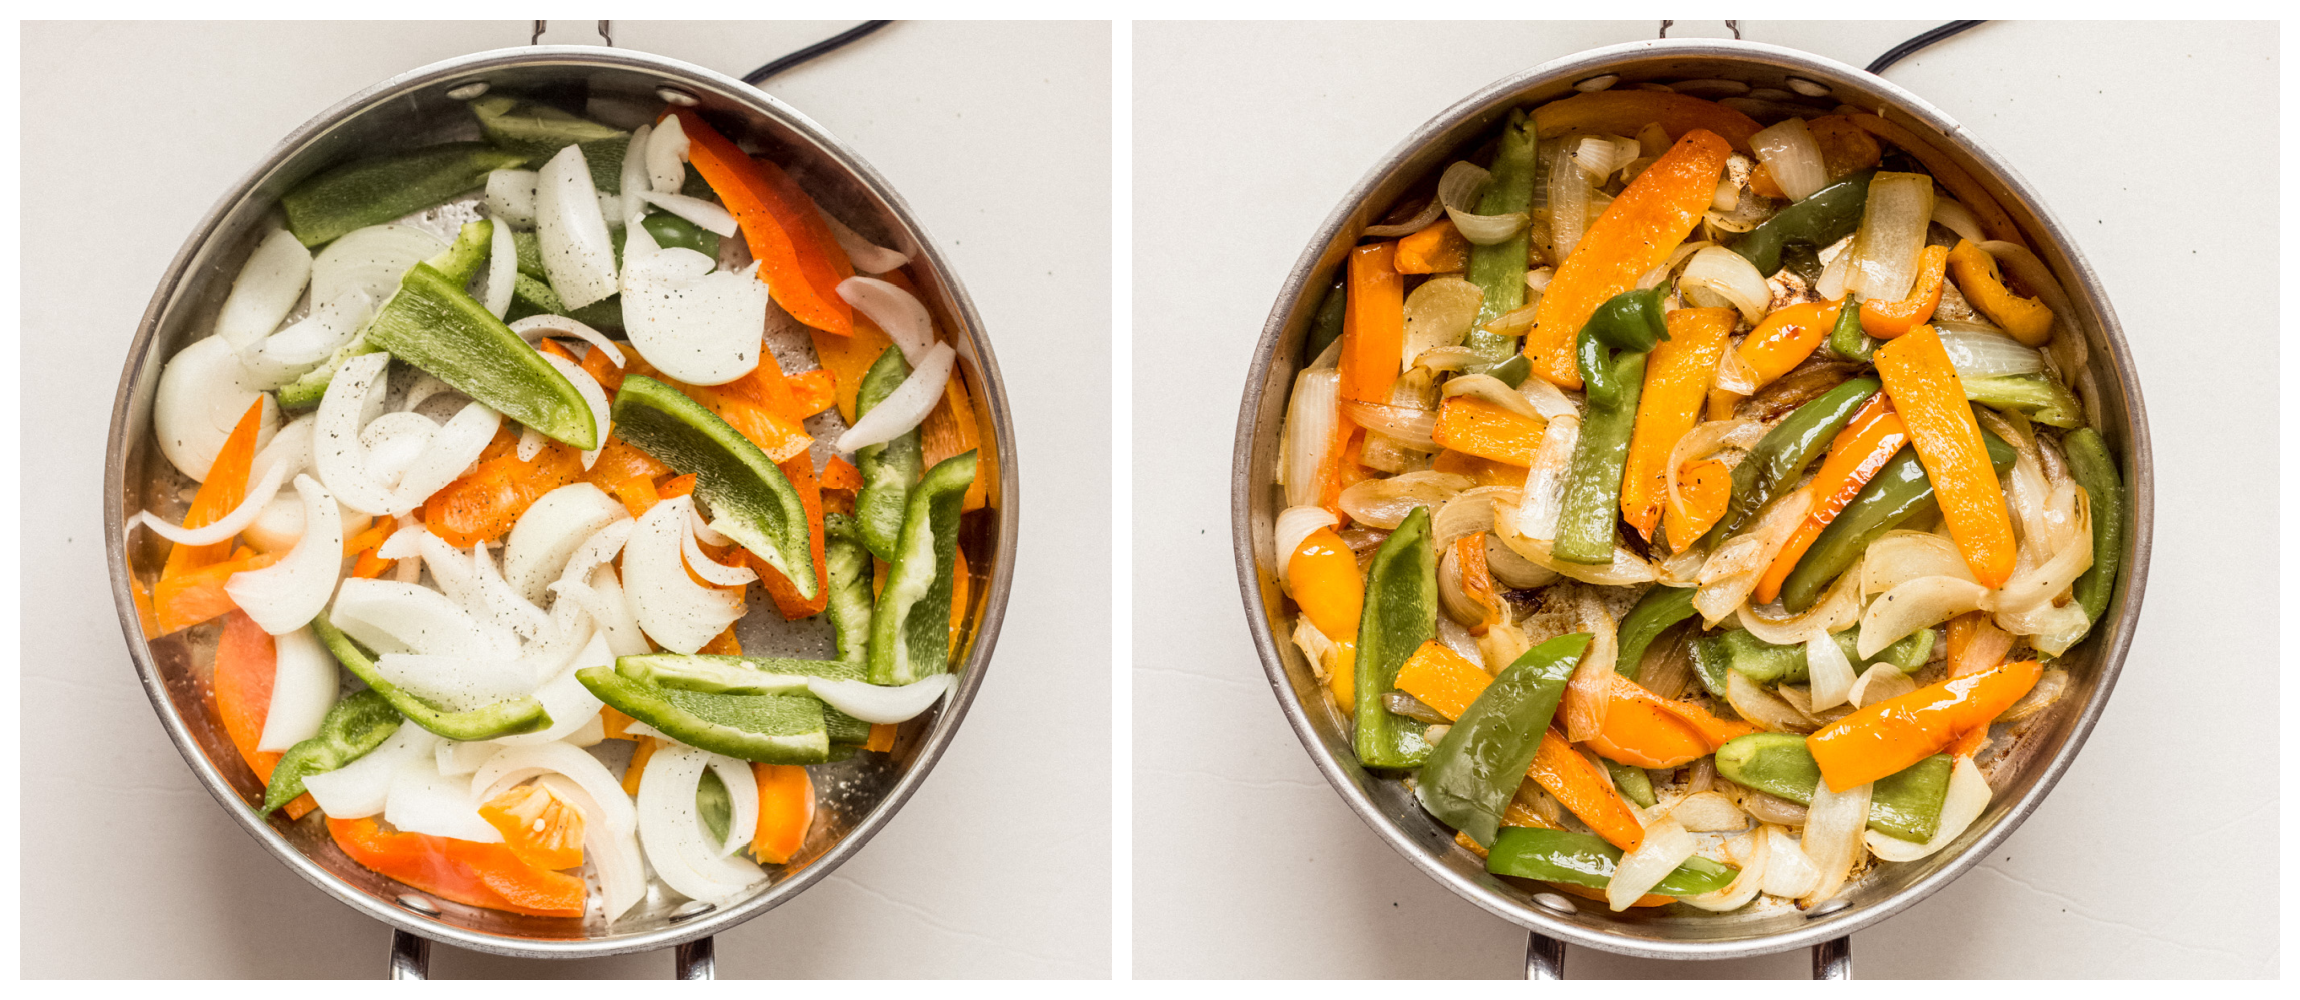 two skillet photos showing raw peppers and onion in one, and cooked peppers and onions in second.